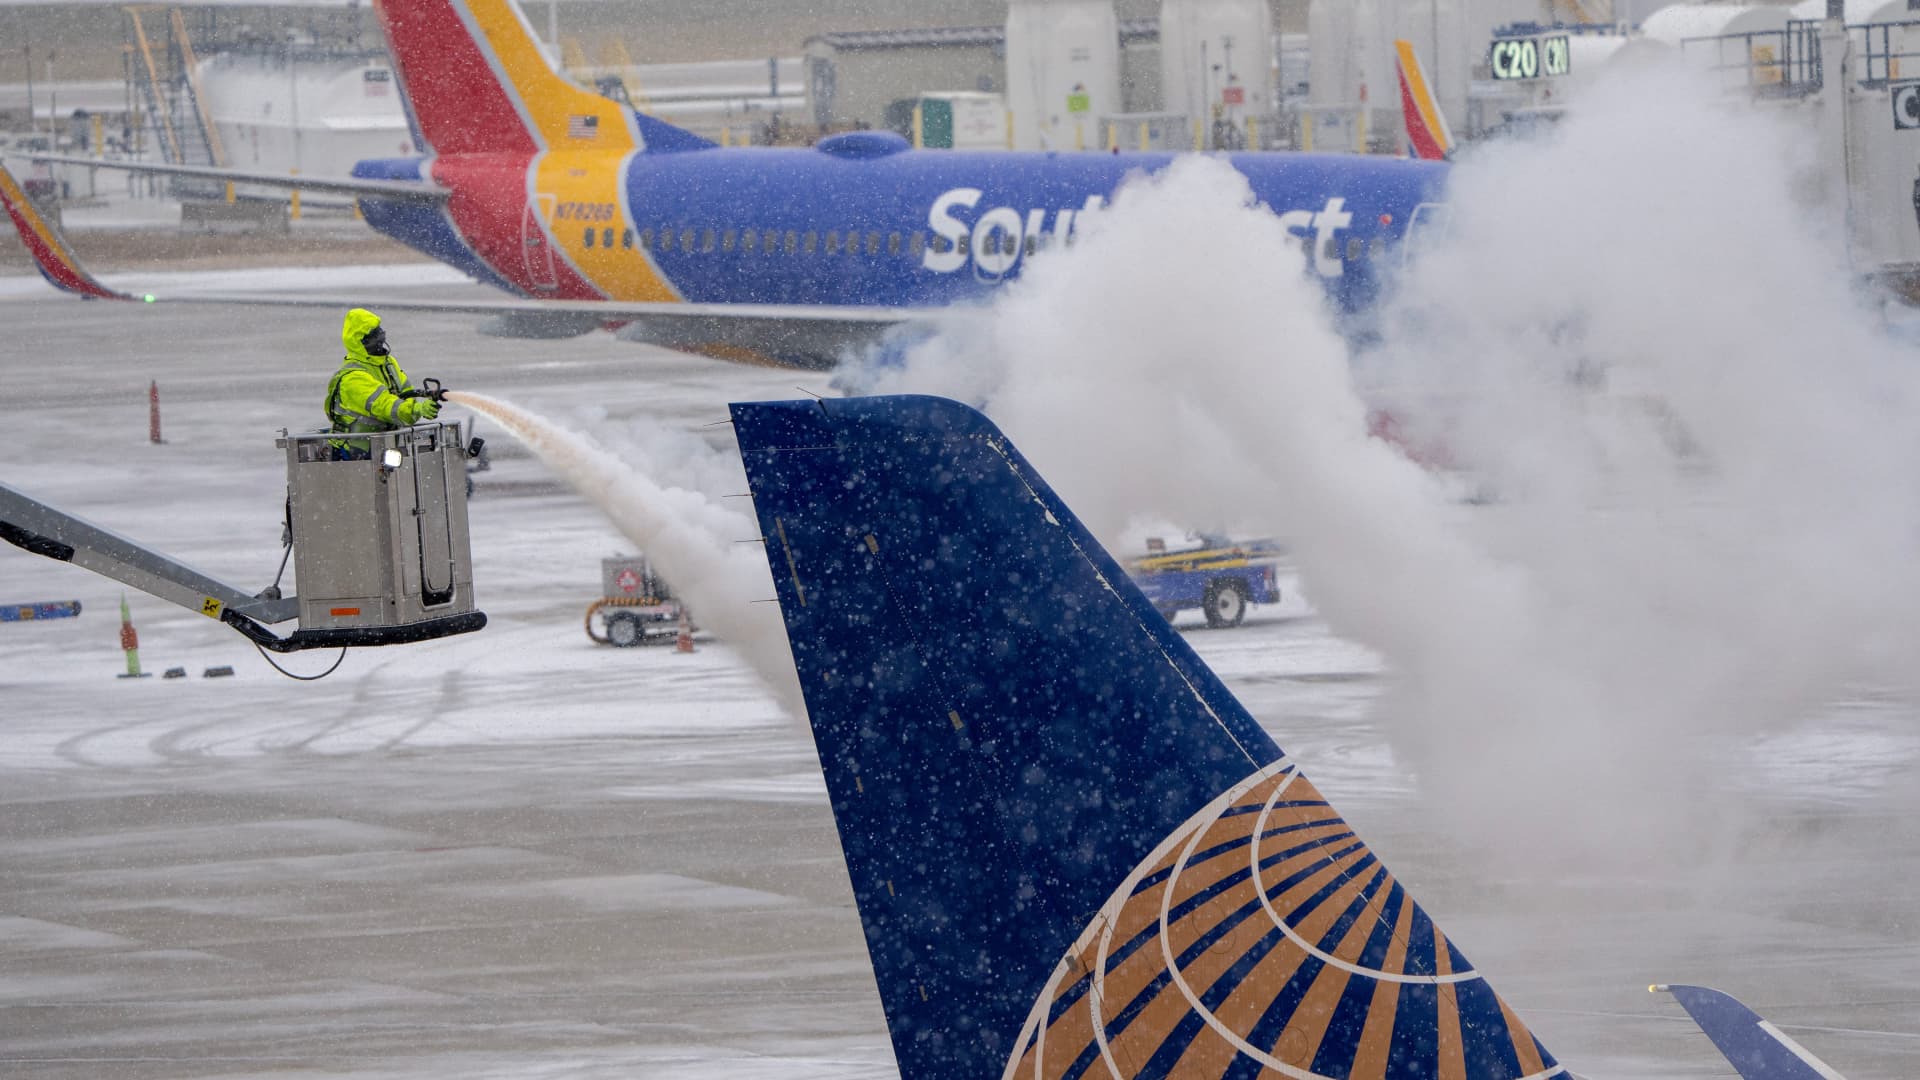 Southwest cancels 60% of flights while air travel disruptions ease elsewhere after storms